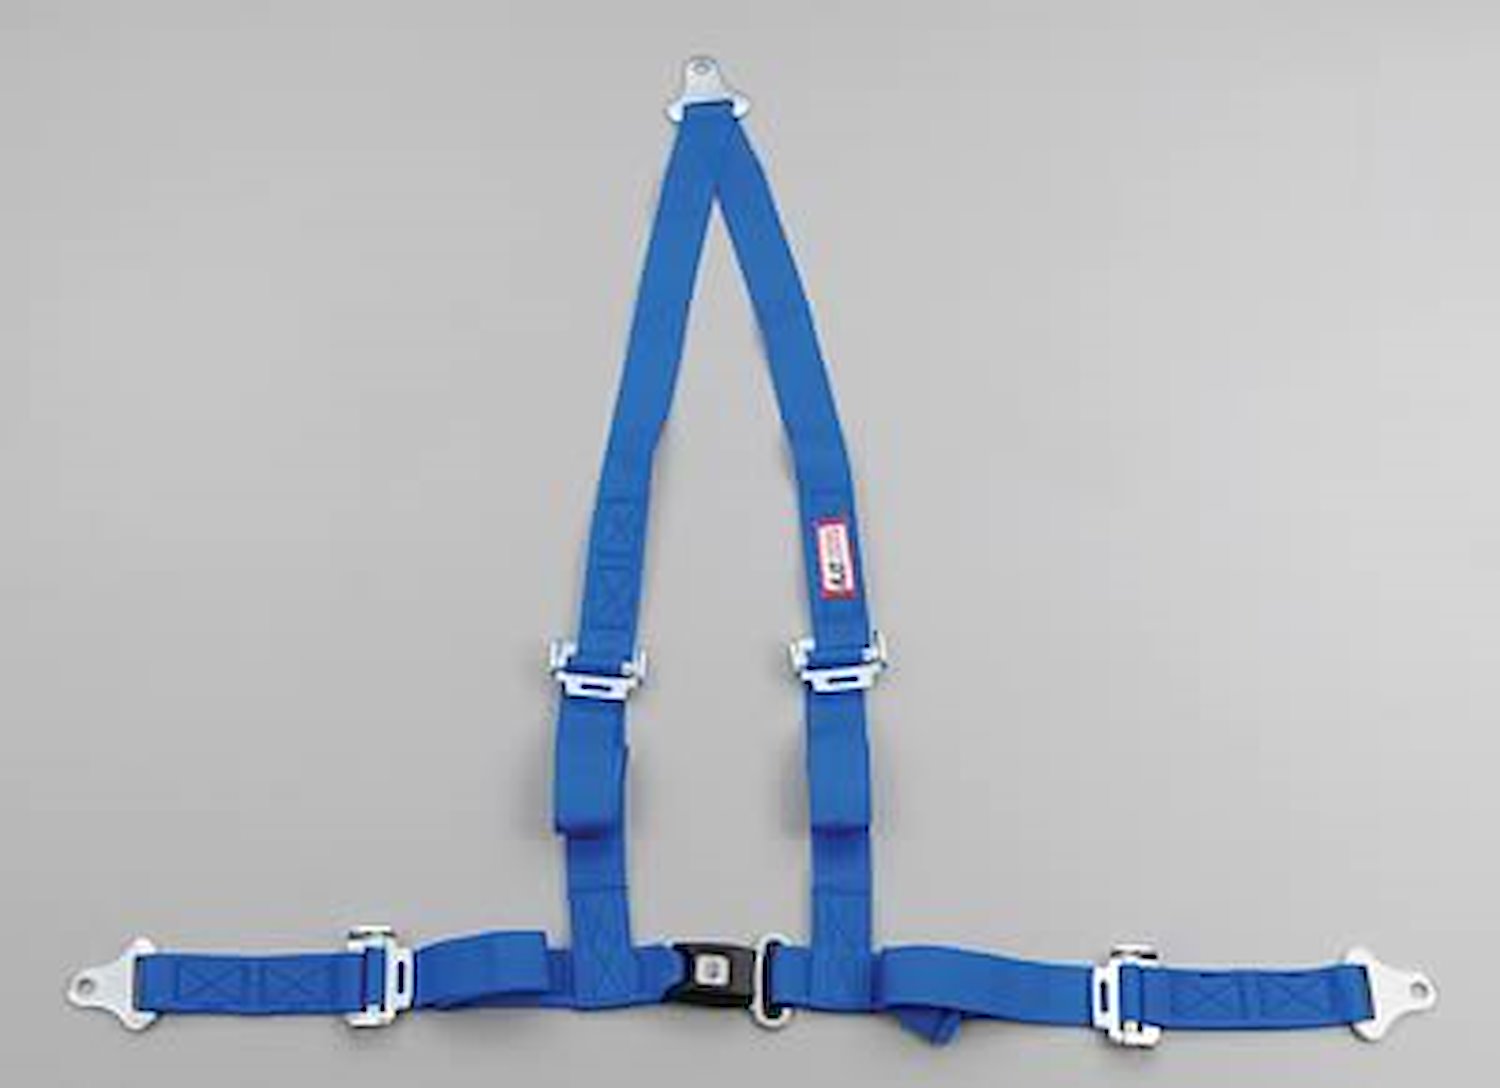 NON-SFI B&T HARNESS 2 PULL DOWN Lap Belt 2 S. H. V ROLL BAR Mount ALL WRAP ENDS w/STERNUM STRAP BLUE